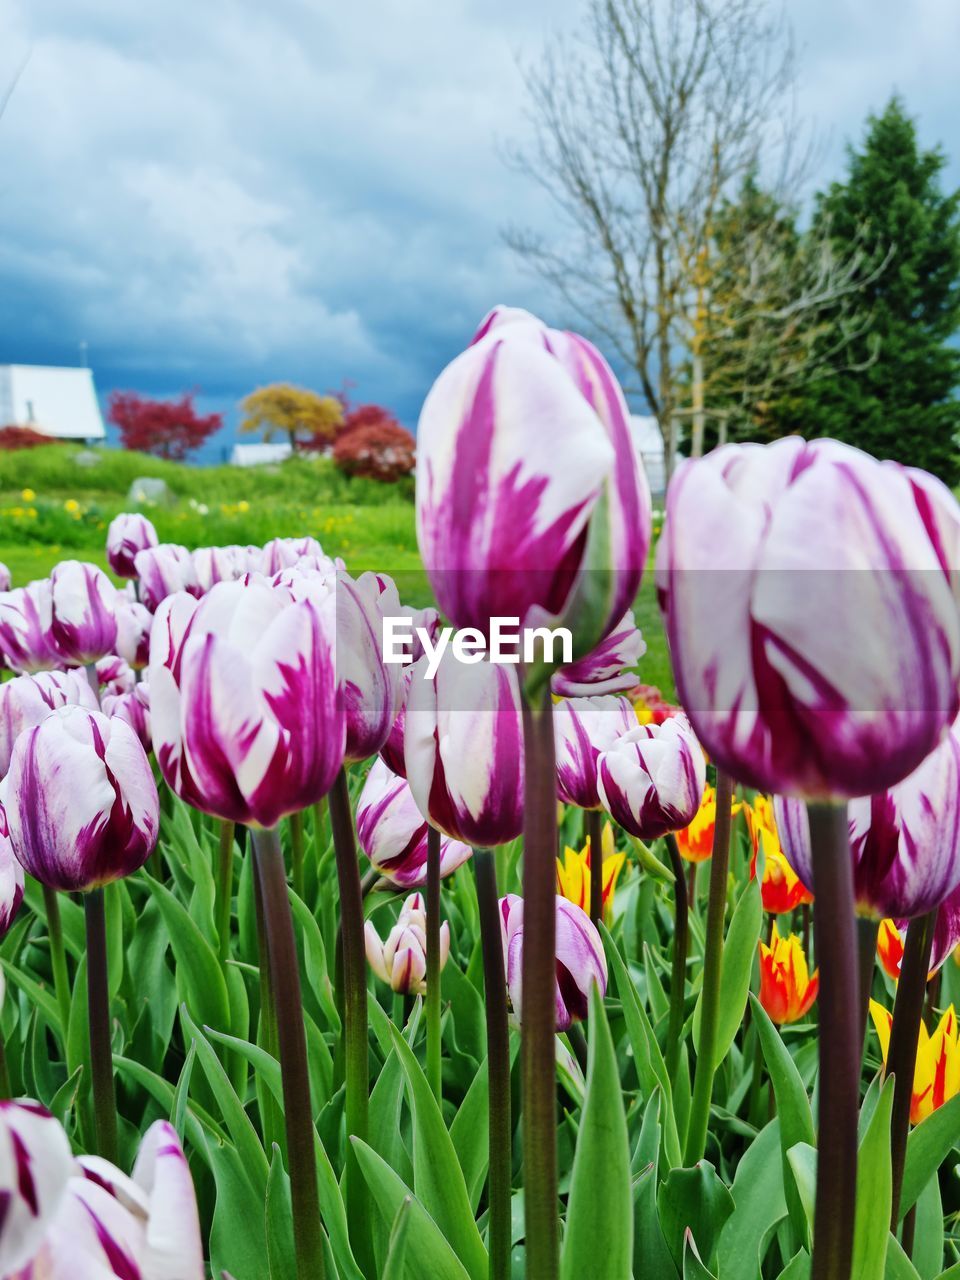 plant, flower, flowering plant, beauty in nature, freshness, nature, pink, fragility, tulip, growth, close-up, cloud, petal, sky, flower head, no people, inflorescence, springtime, day, outdoors, field, blossom, purple, green, land, focus on foreground, multi colored, landscape, environment